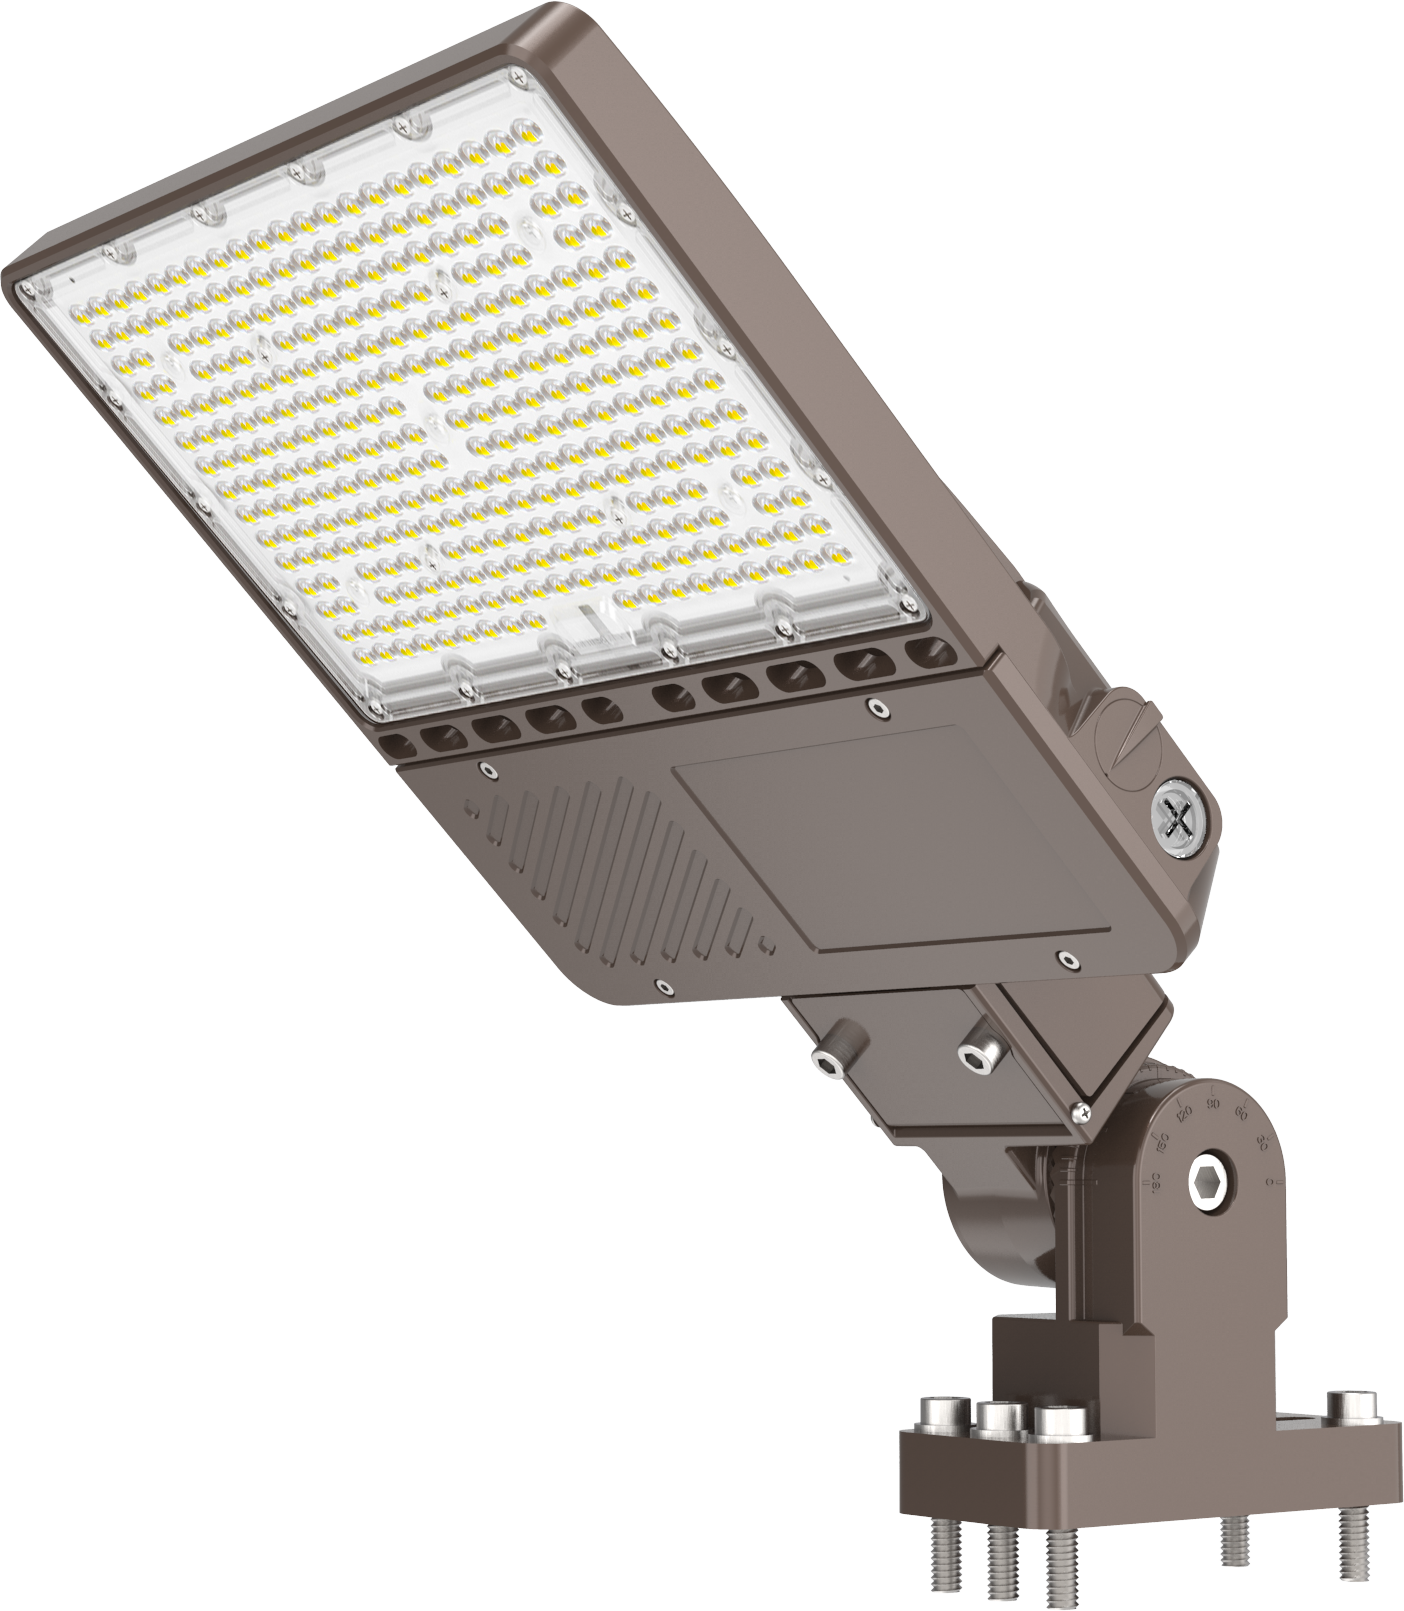 200W LED Parking Lot Light, Free Shipping from USA/CA